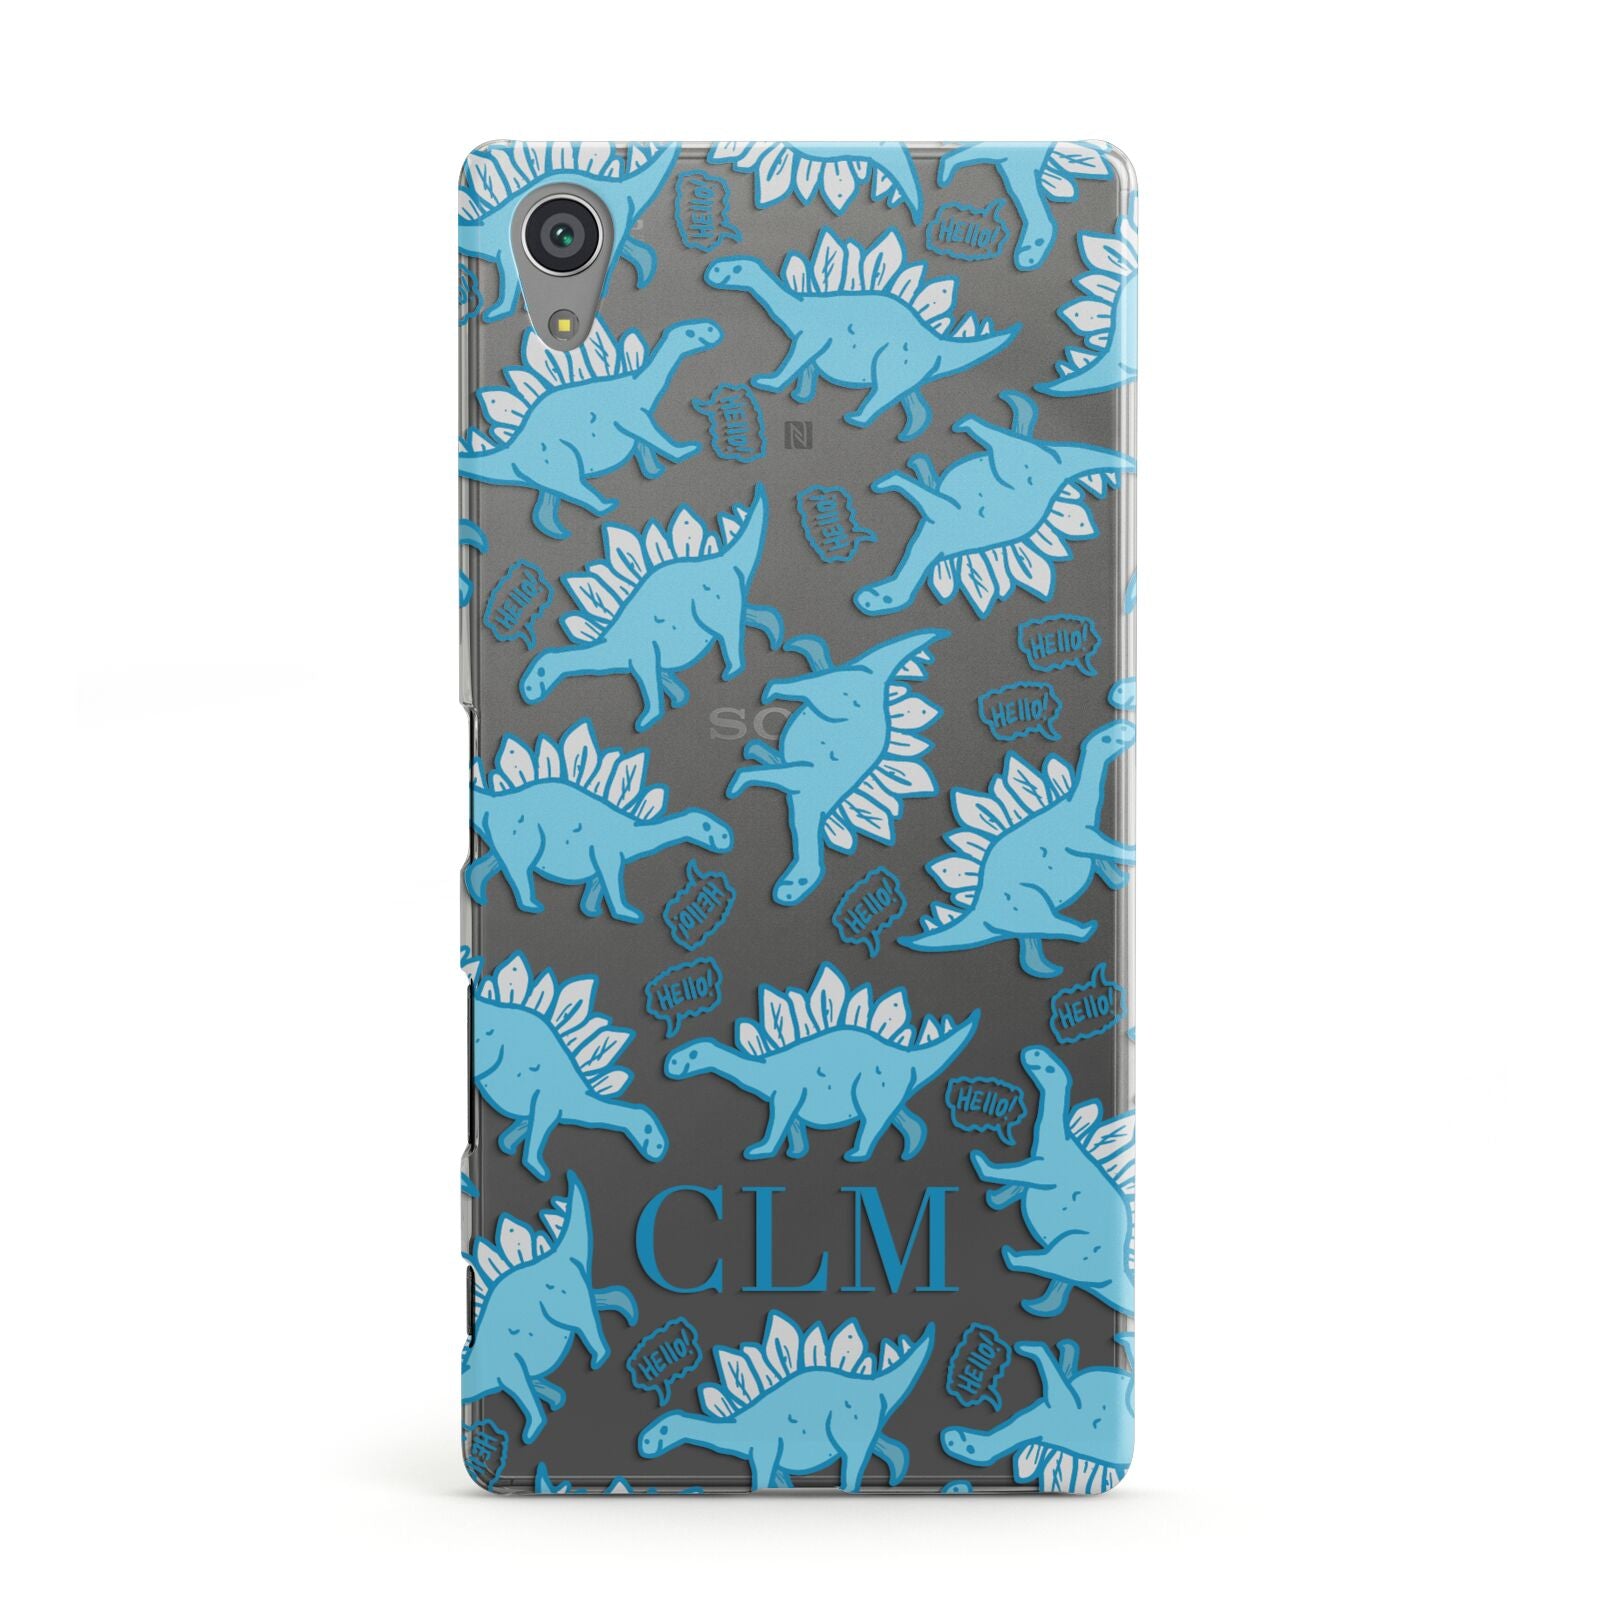 Personalised Dinosaur Initials Sony Xperia Case